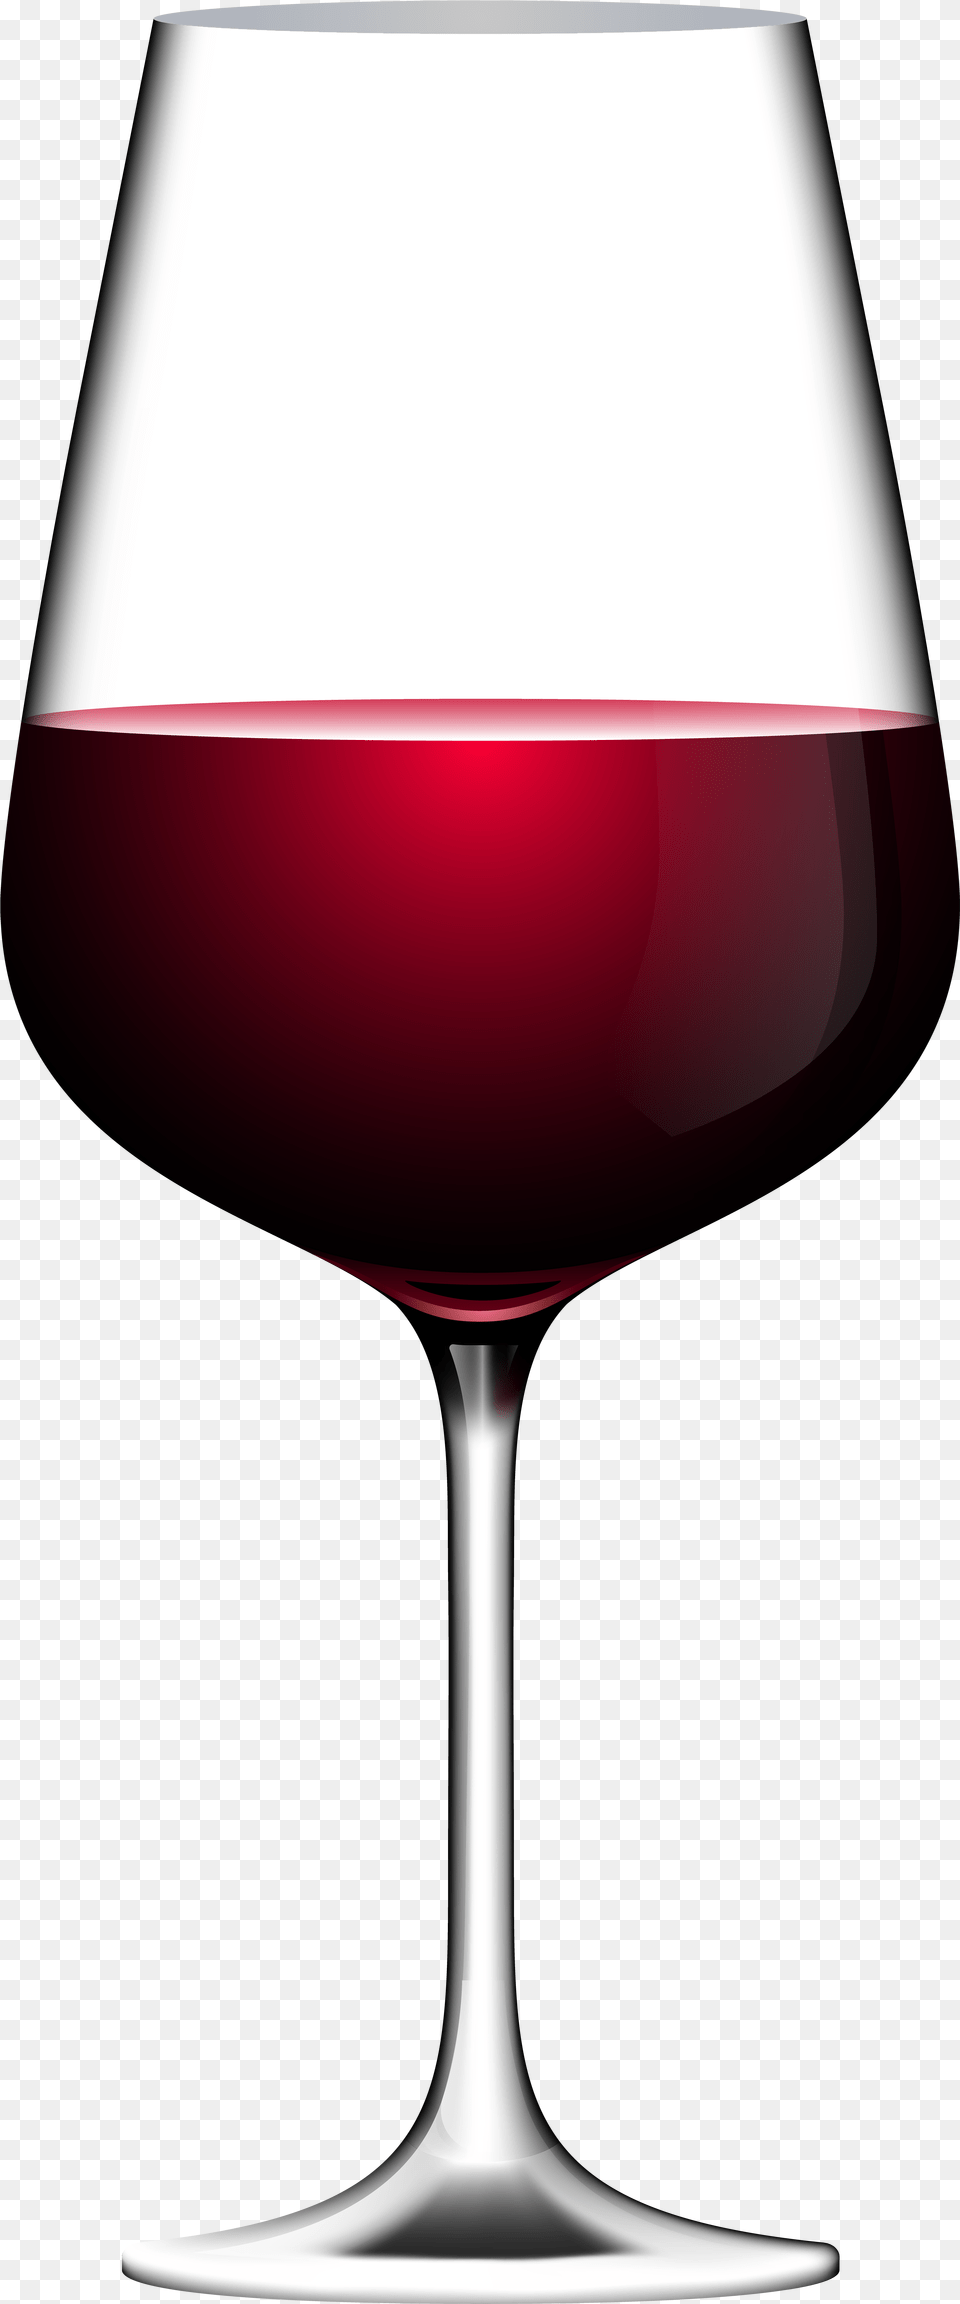 Background Red Wine Glass Clipart Red Wine Glass Clipart, Alcohol, Beverage, Liquor, Red Wine Png Image